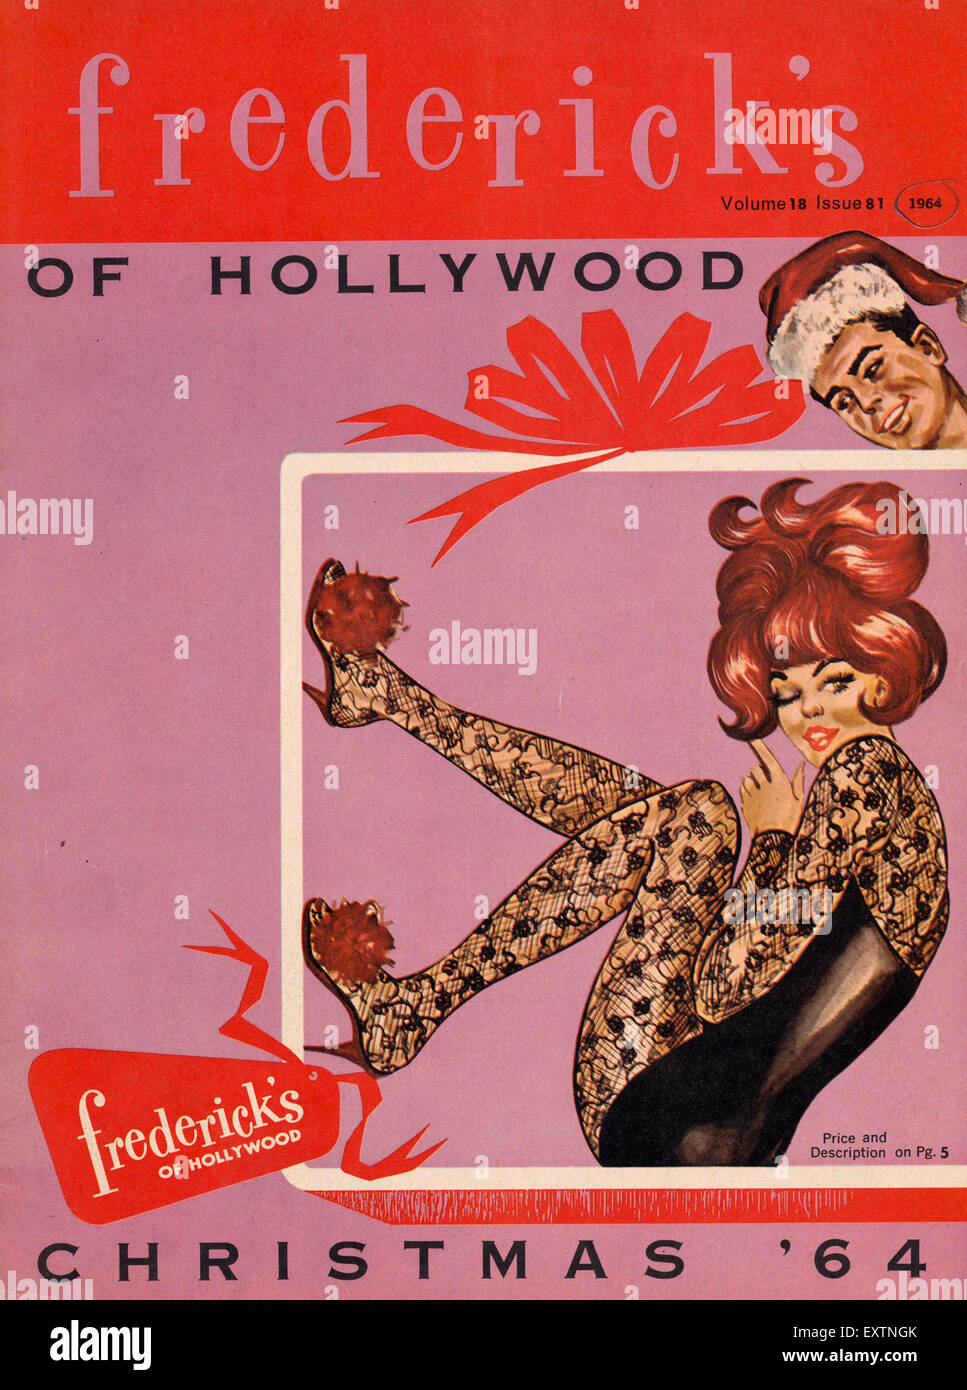 1960s USA Frederick's of Hollywood Catalogue Cover Stock Photo